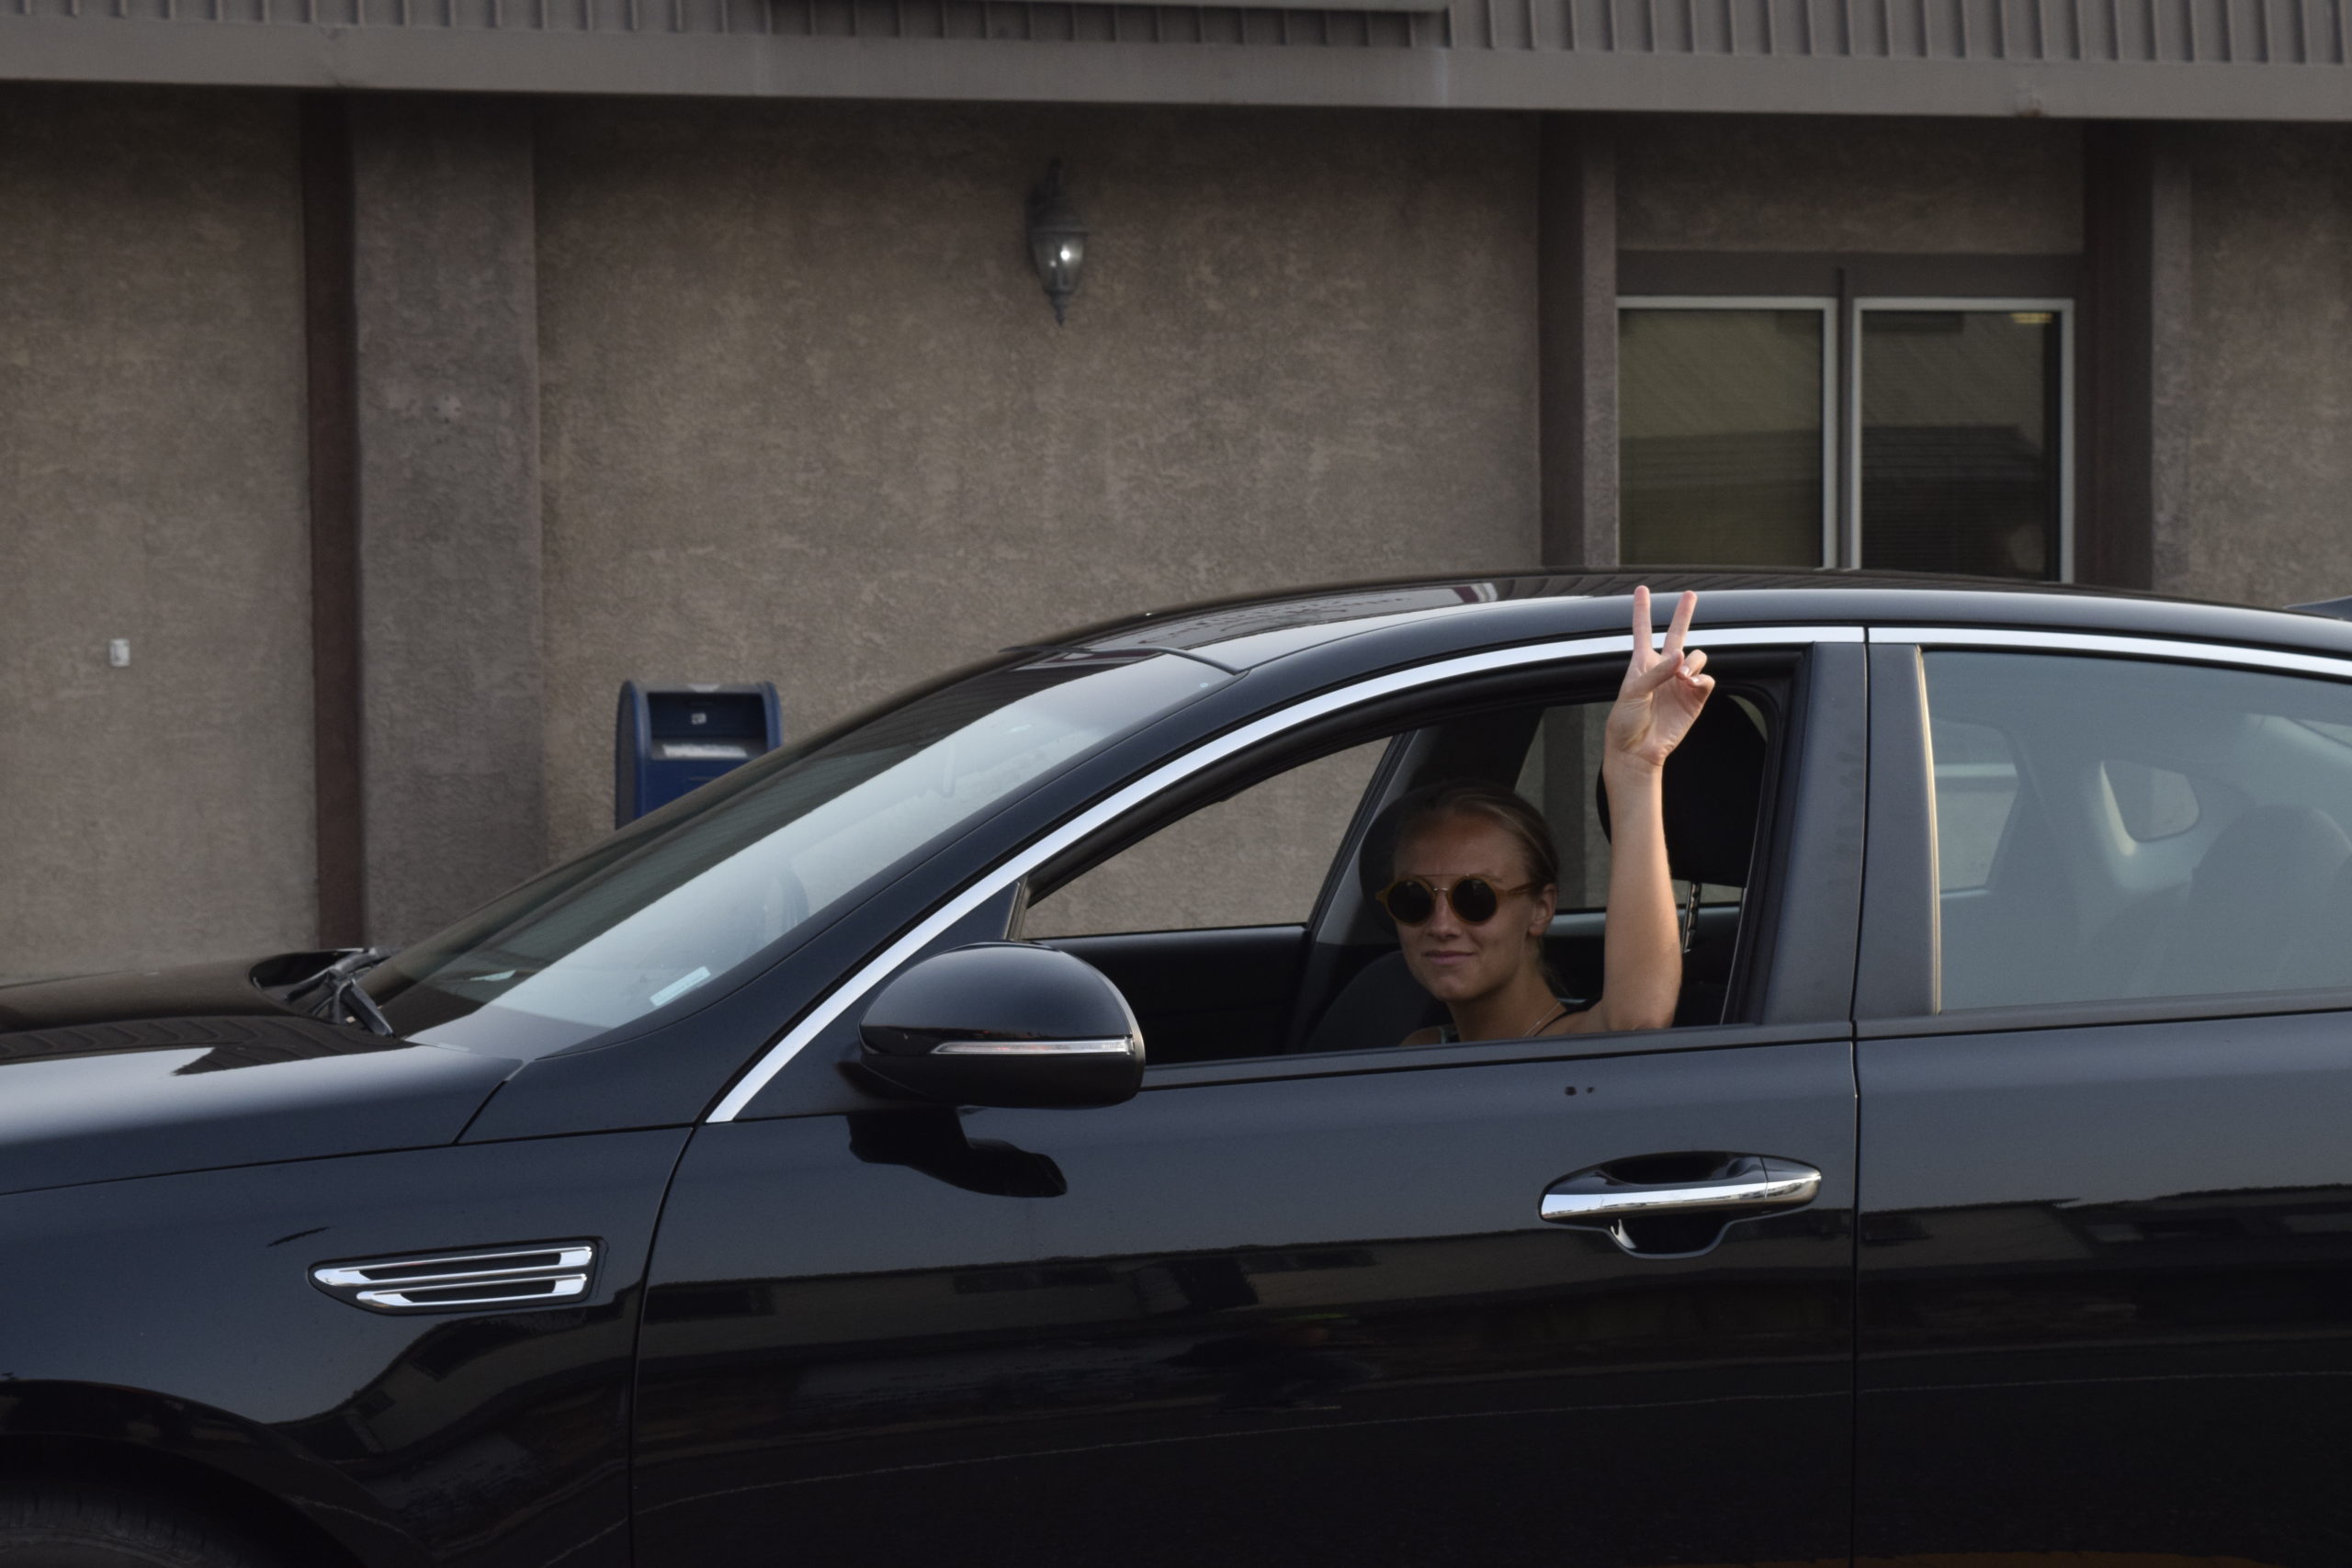 A woman driving by flashes a peace sign